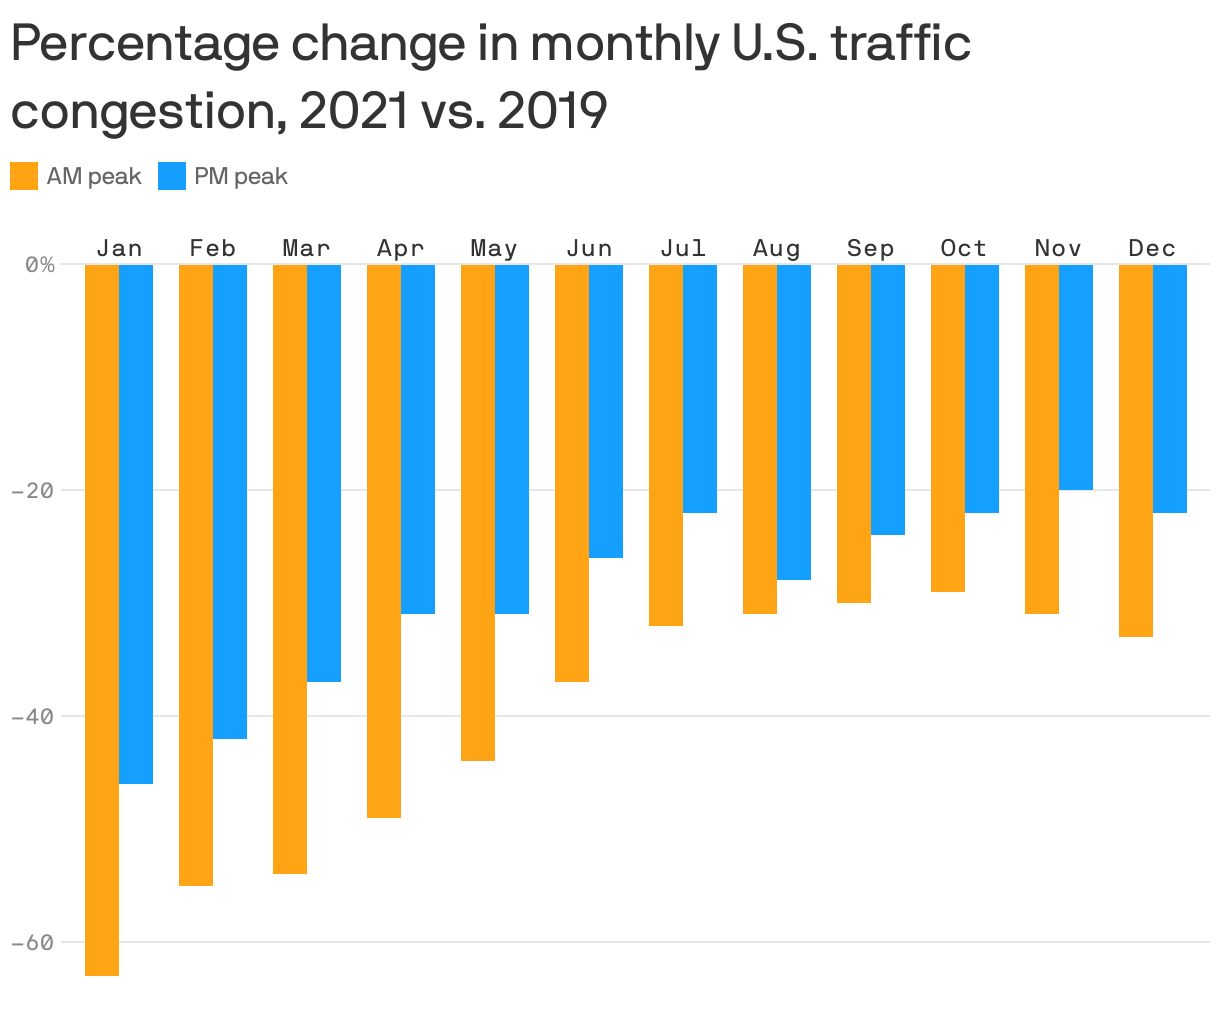 Percentage change in monthly U.S. traffic congestion, 2021 vs. 2019